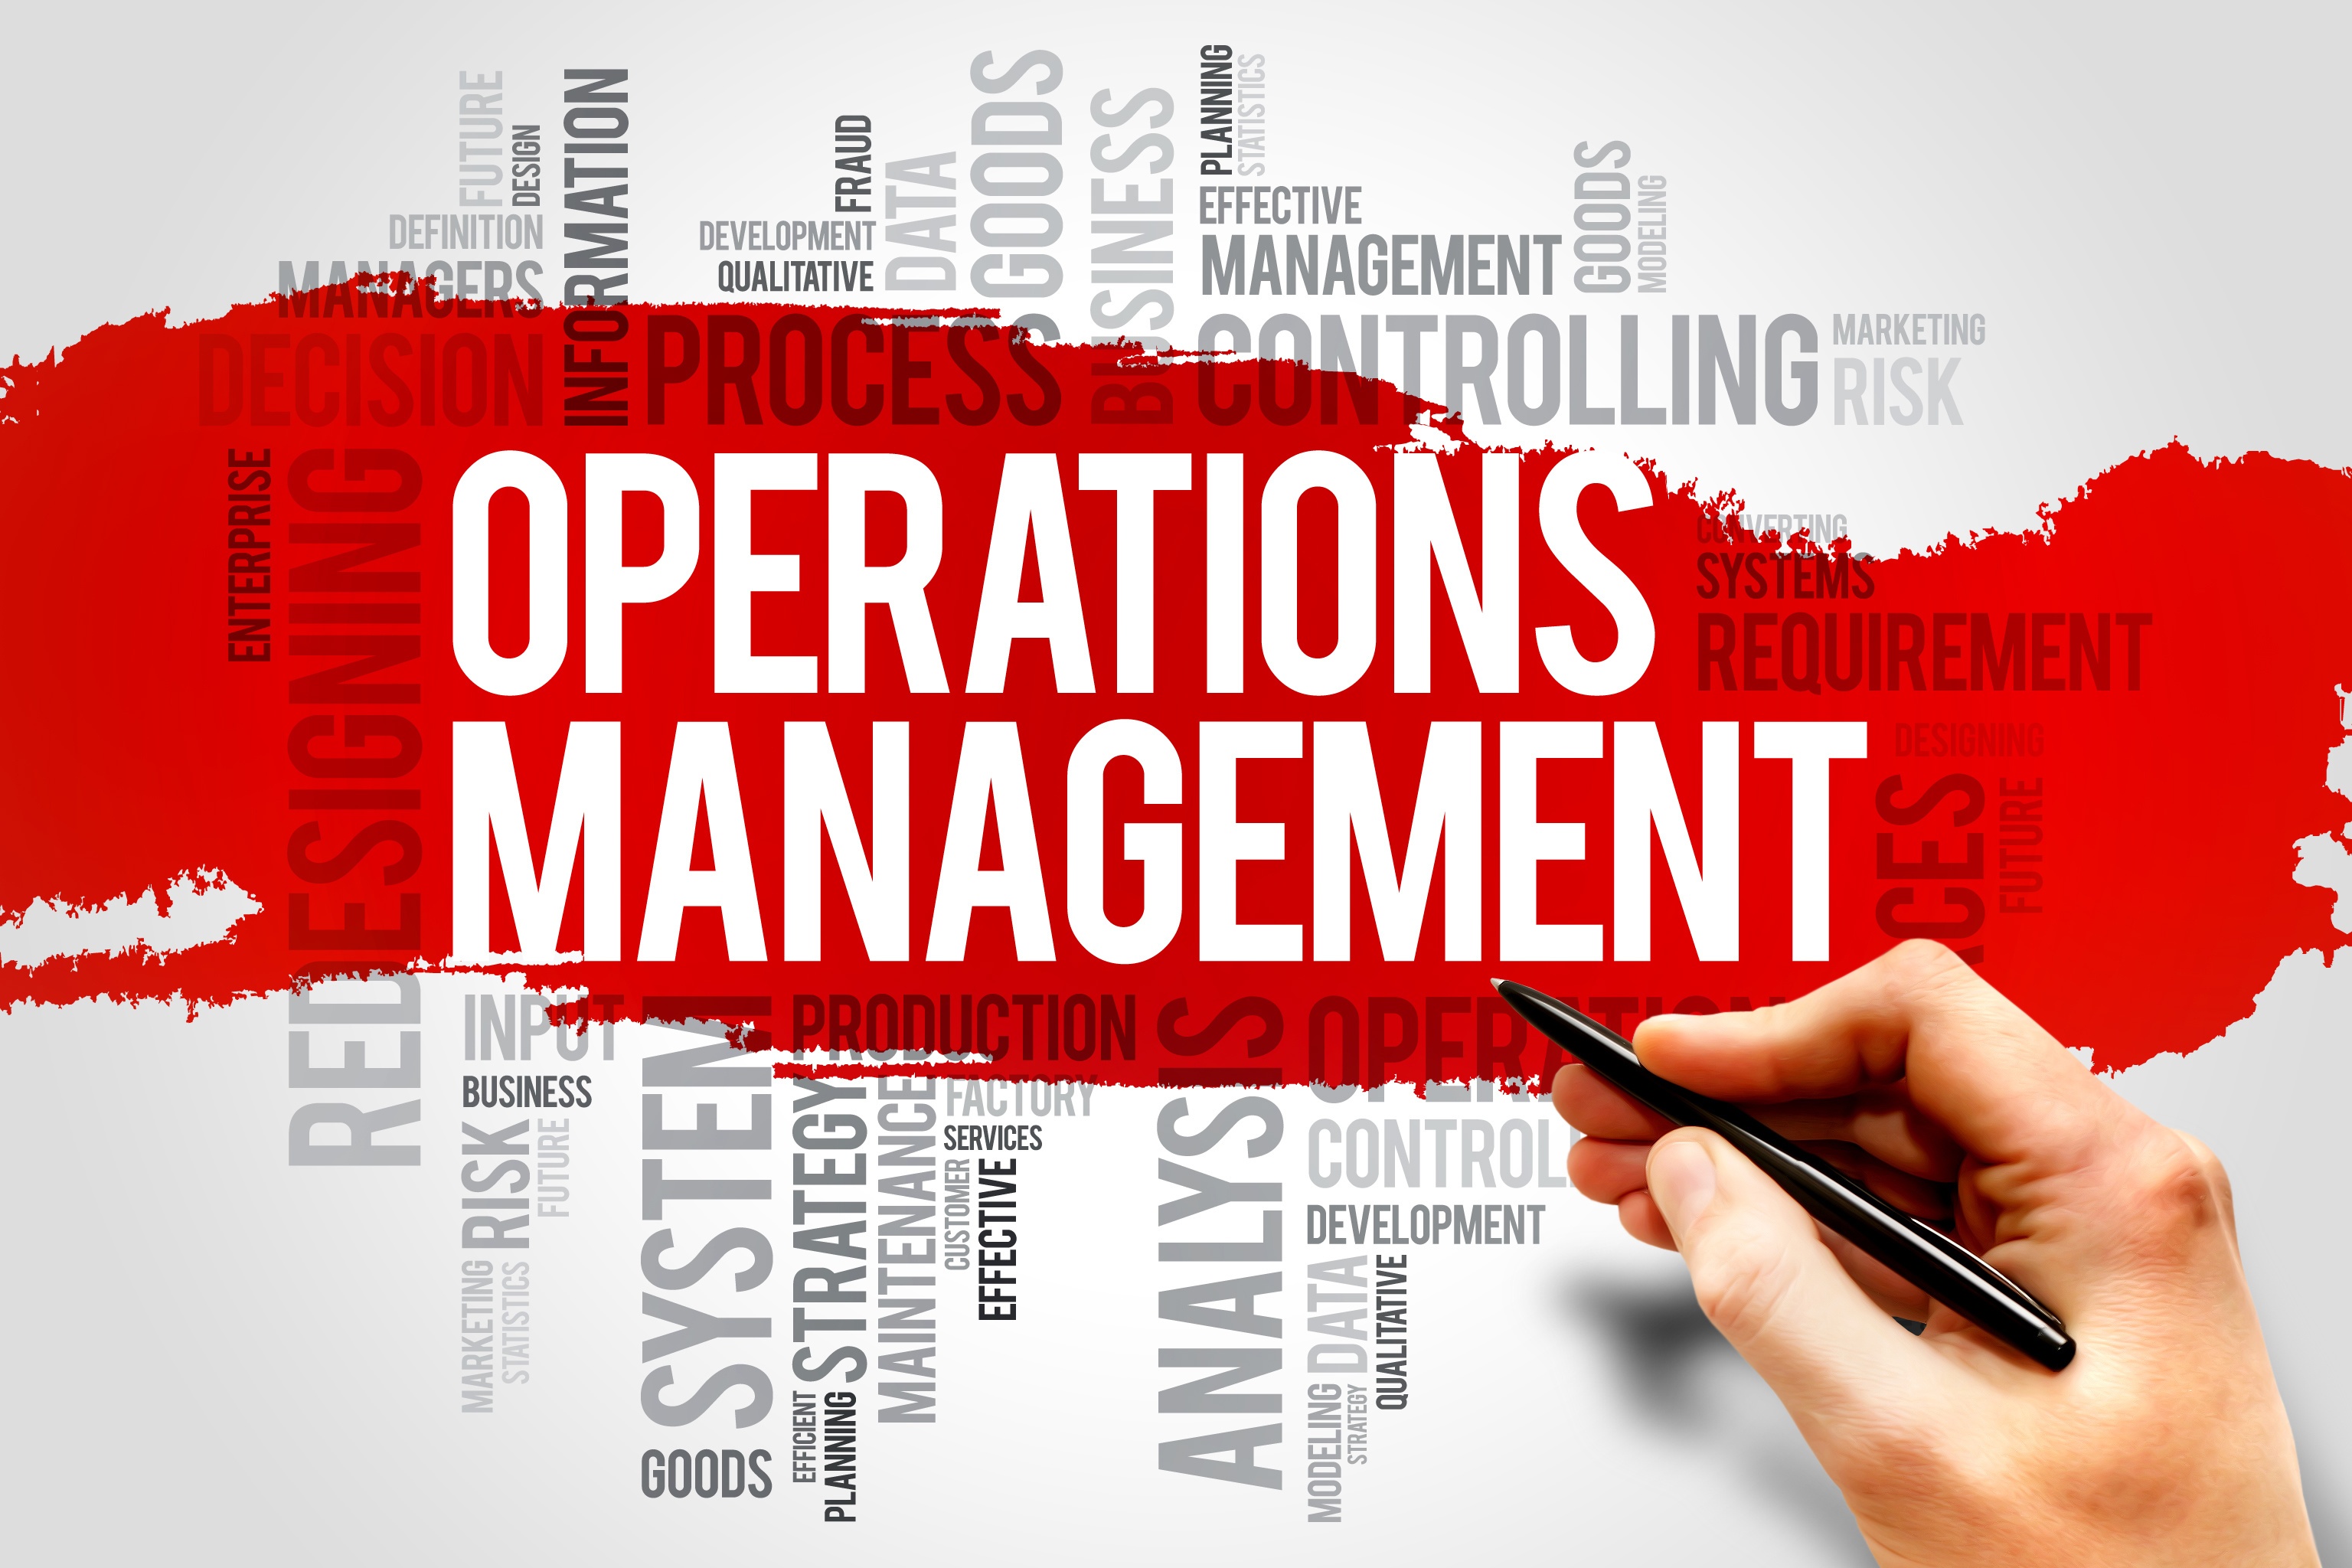 business-outcomes-the-real-priority-when-it-comes-to-it-operations